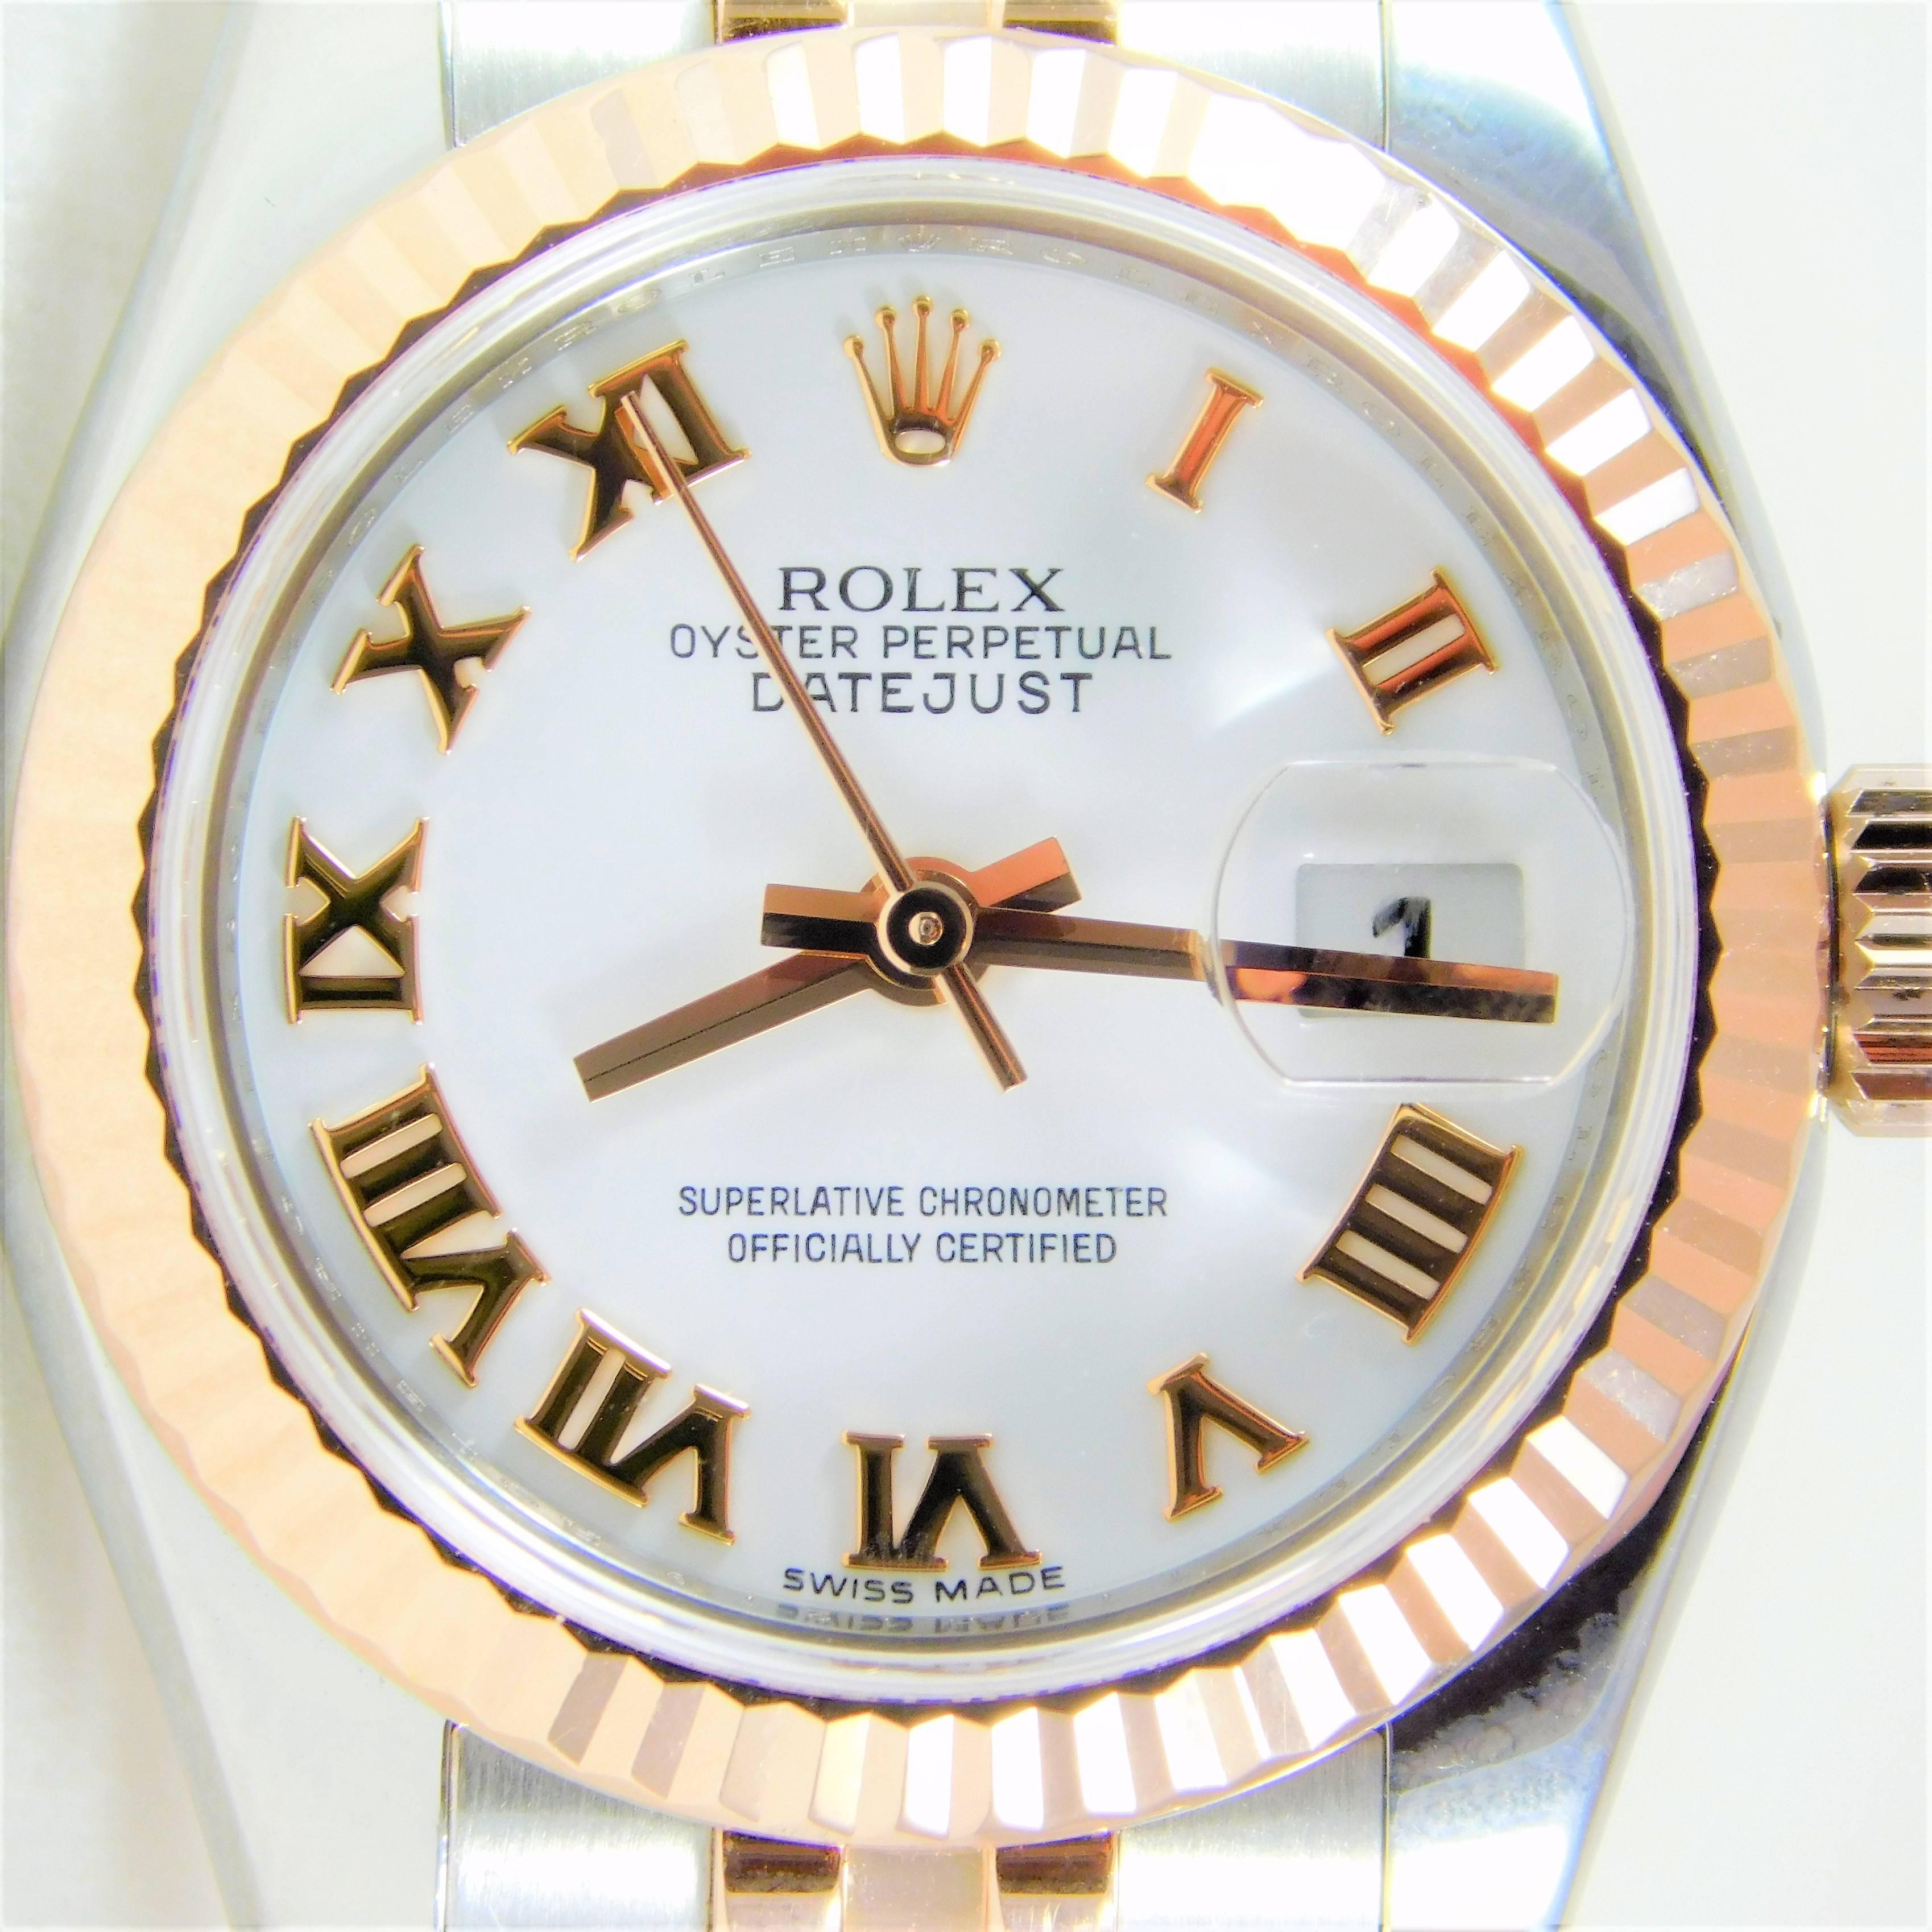 The Rolex Date Oyster Perpetual DateJust is one of the most sought-after lady’s luxury time pieces in the world.  It is a symbol of status. From an exquisite Southern estate.  This 2014 Ladies Rolex Oyster Perpetual DateJust is in mint condition and